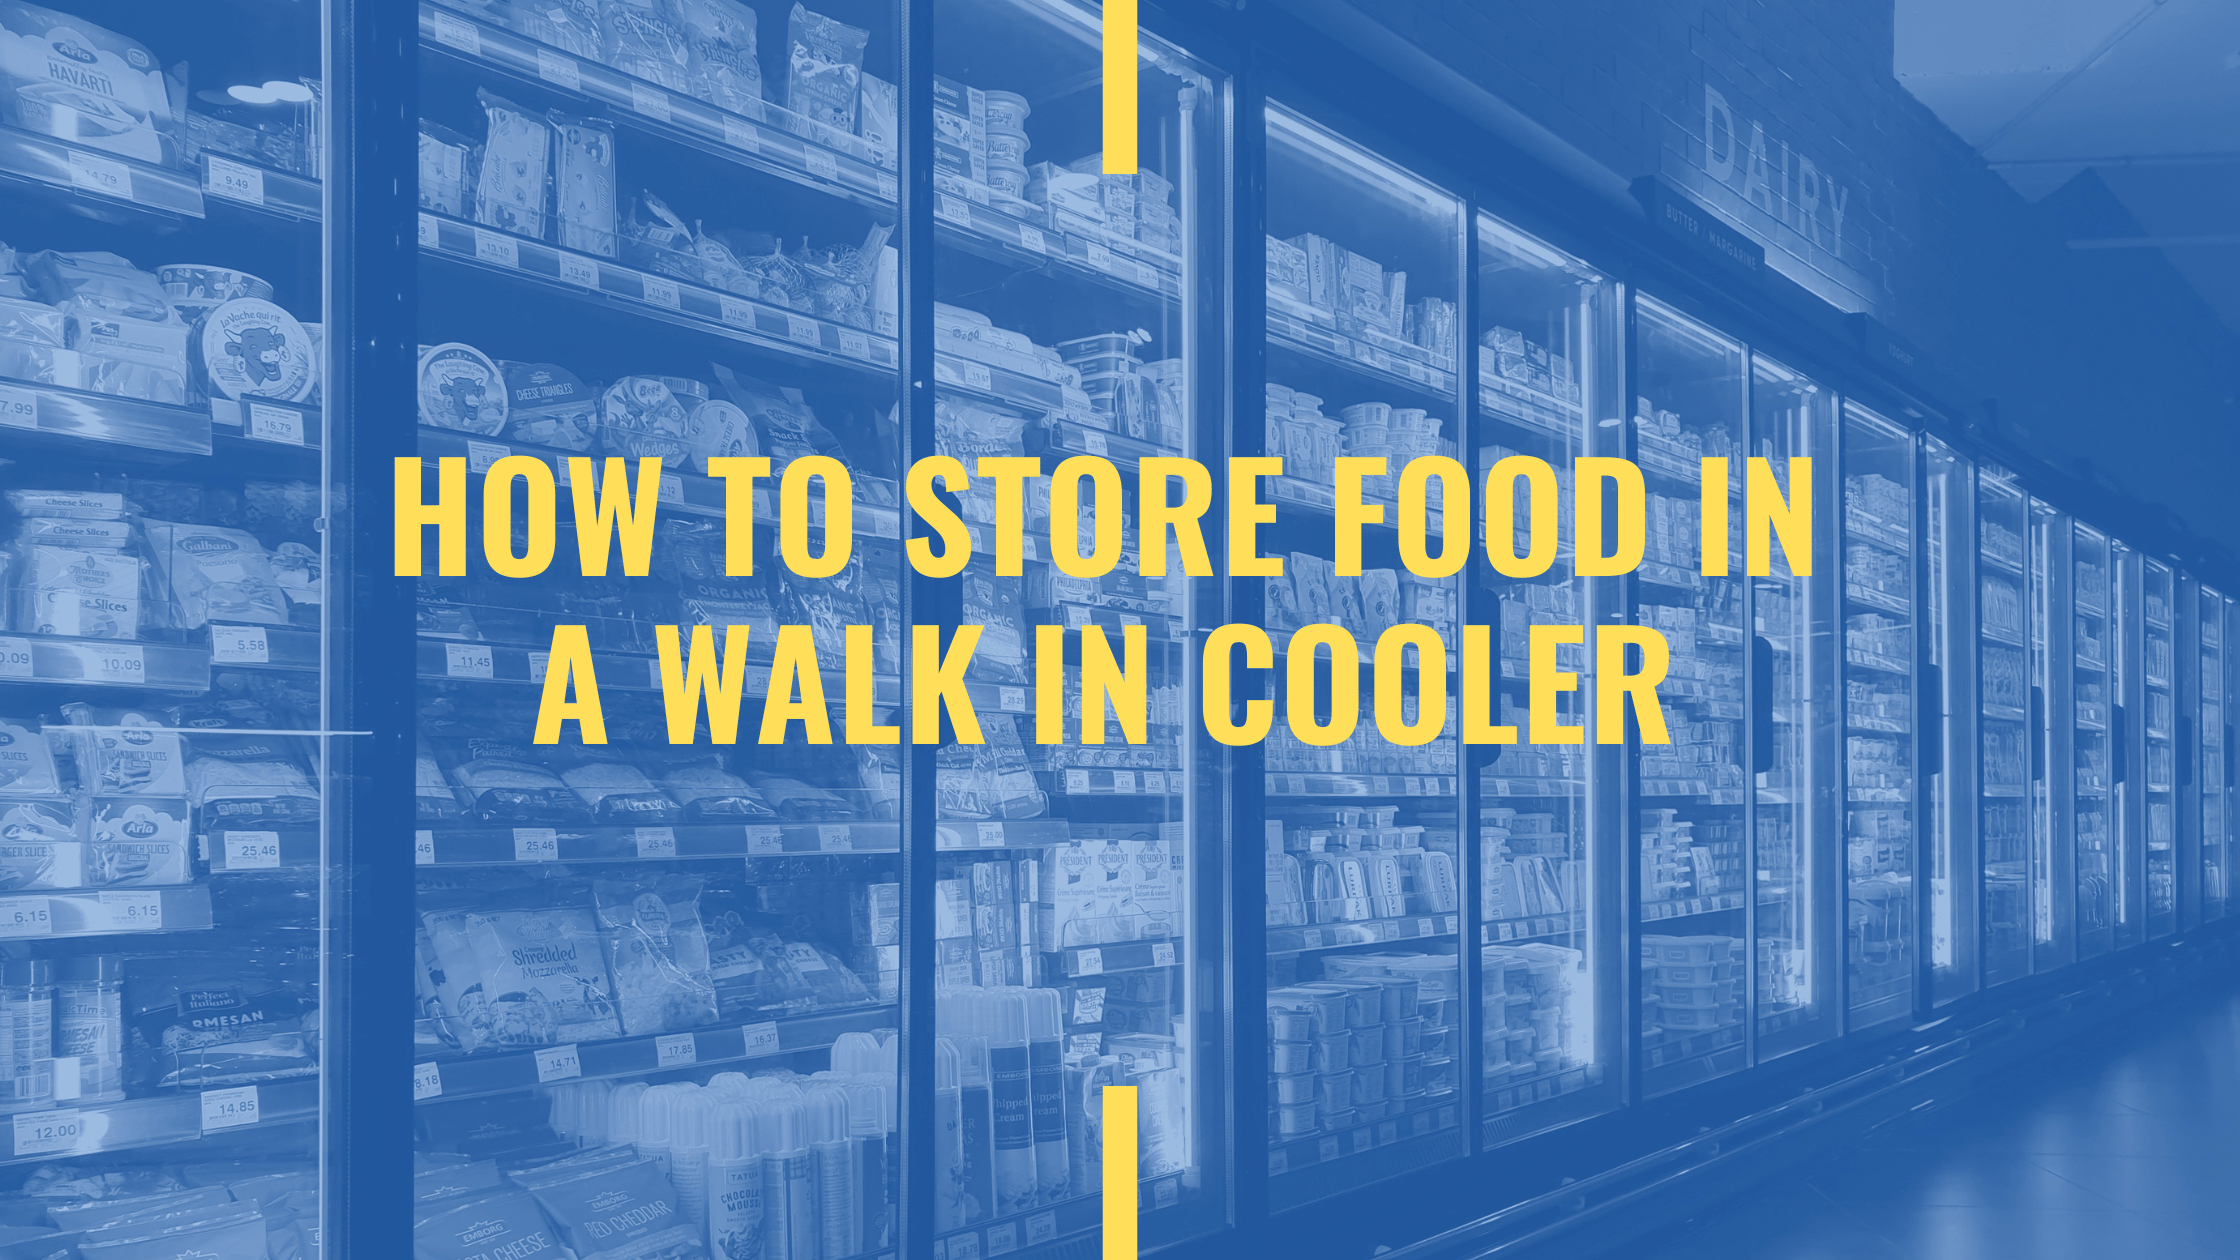 How to Store Food in a Walk in Cooler